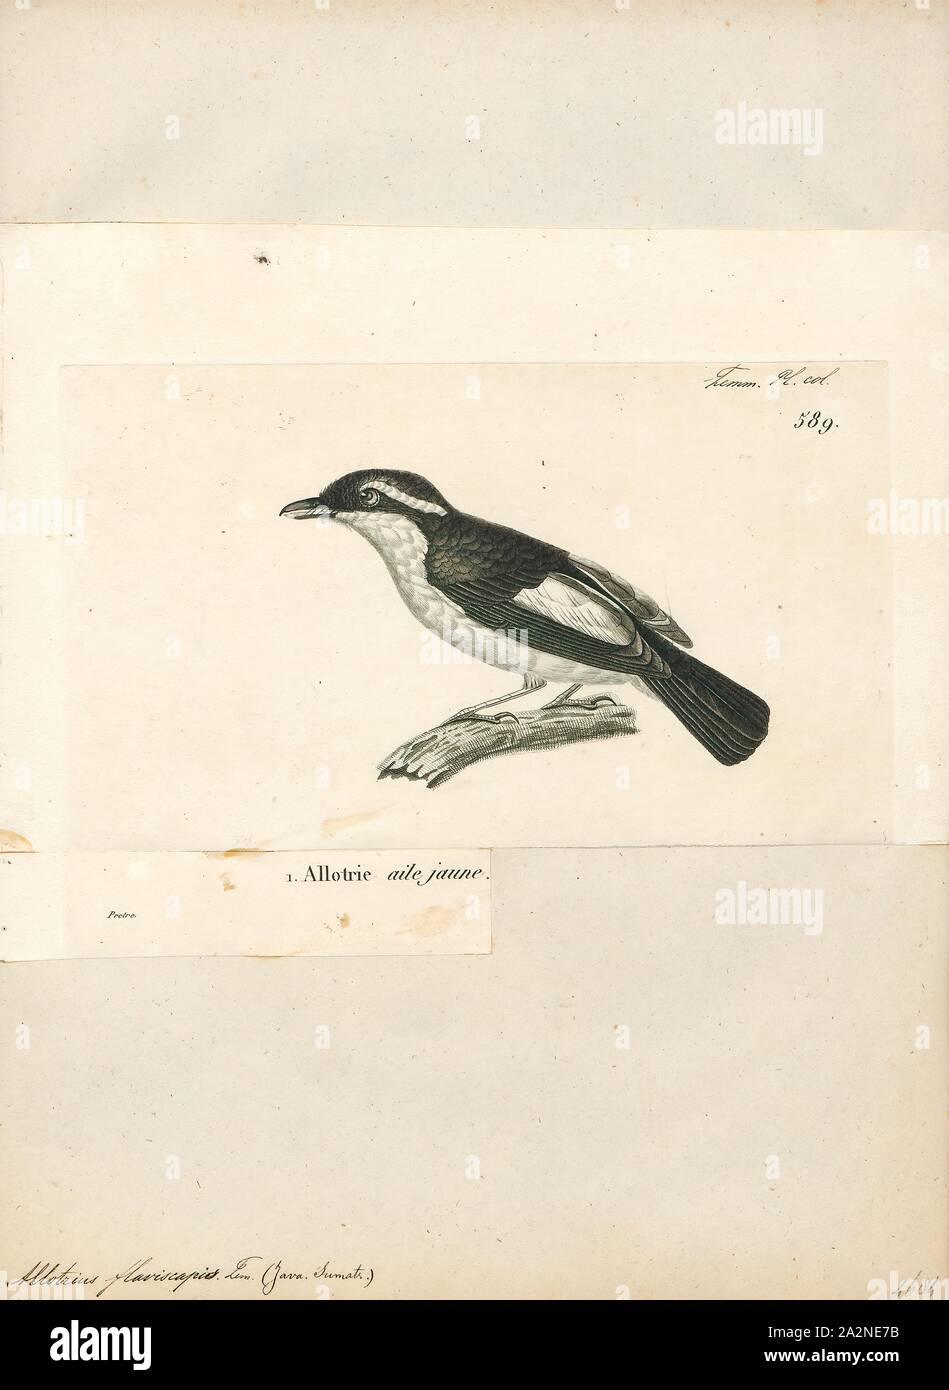 Pteruthius flaviscapis, Print, The pied shrike-babbler (Pteruthius flaviscapis) is a bird species traditionally considered an aberrant Old World babbler and placed in the family Timaliidae. But as it seems, it belongs to an Asian offshoot of the American vireos and may well belong in the Vireonidae. Indeed, since long it was noted that their habits resemble those of vireos, but this was believed to be the result of convergent evolution., 1700-1880 Stock Photo